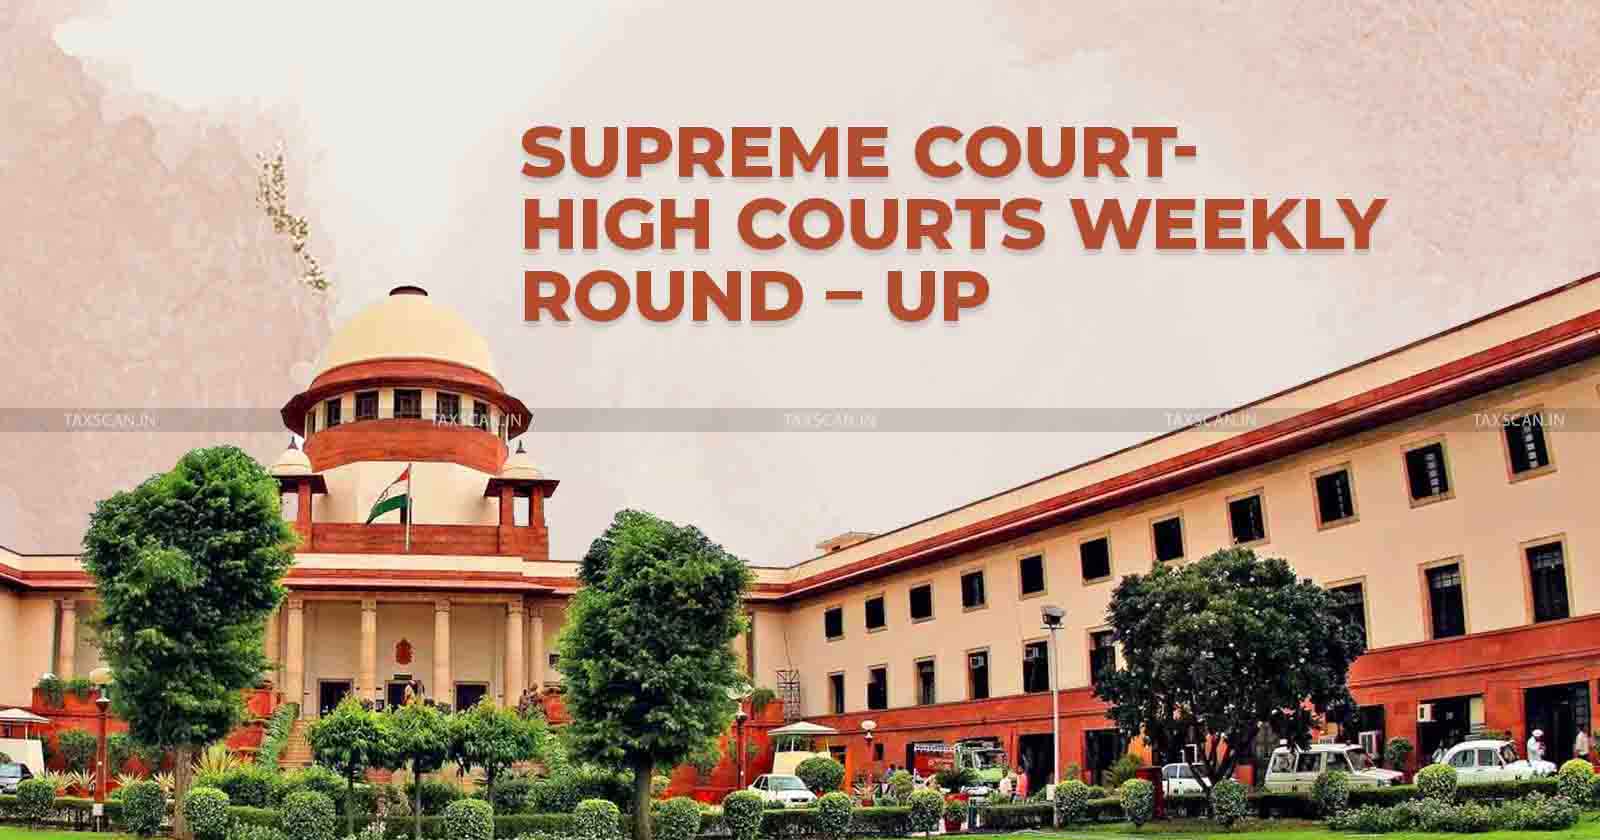 Supreme Court and High Court Weekly Round Up